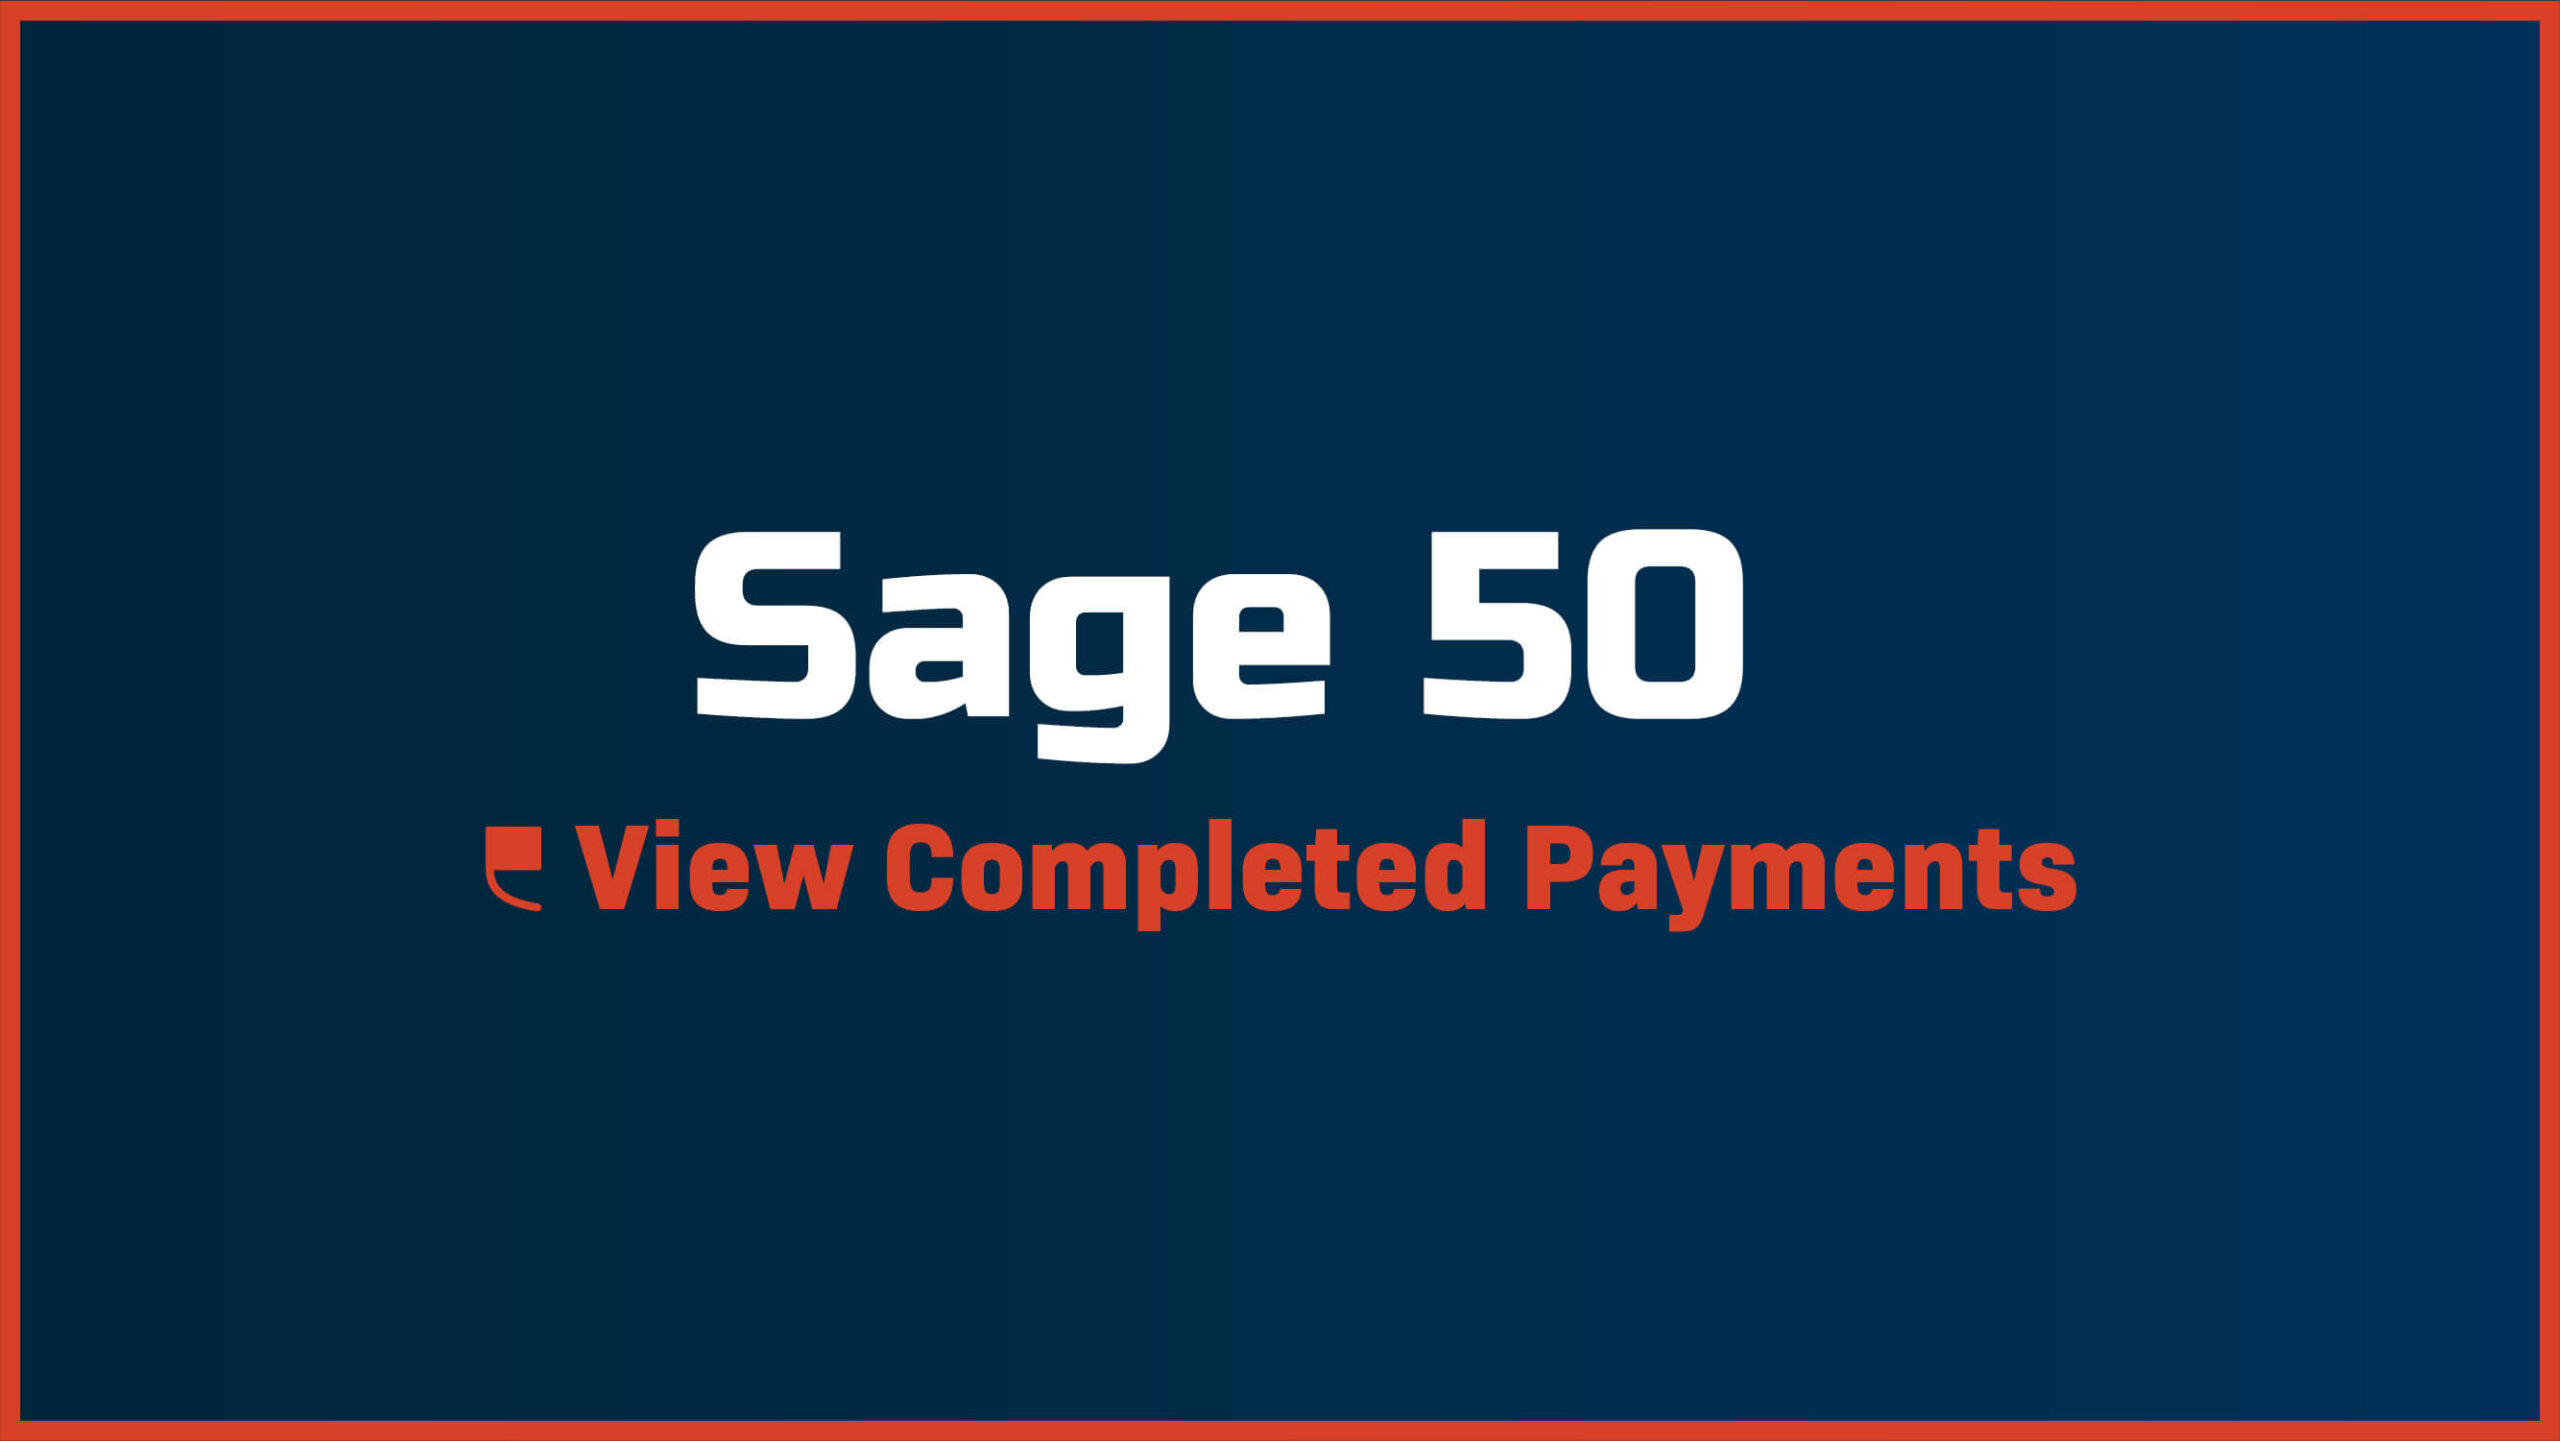 How to View Completed Payments in Fortis Sage 50 Payments - Featured Image